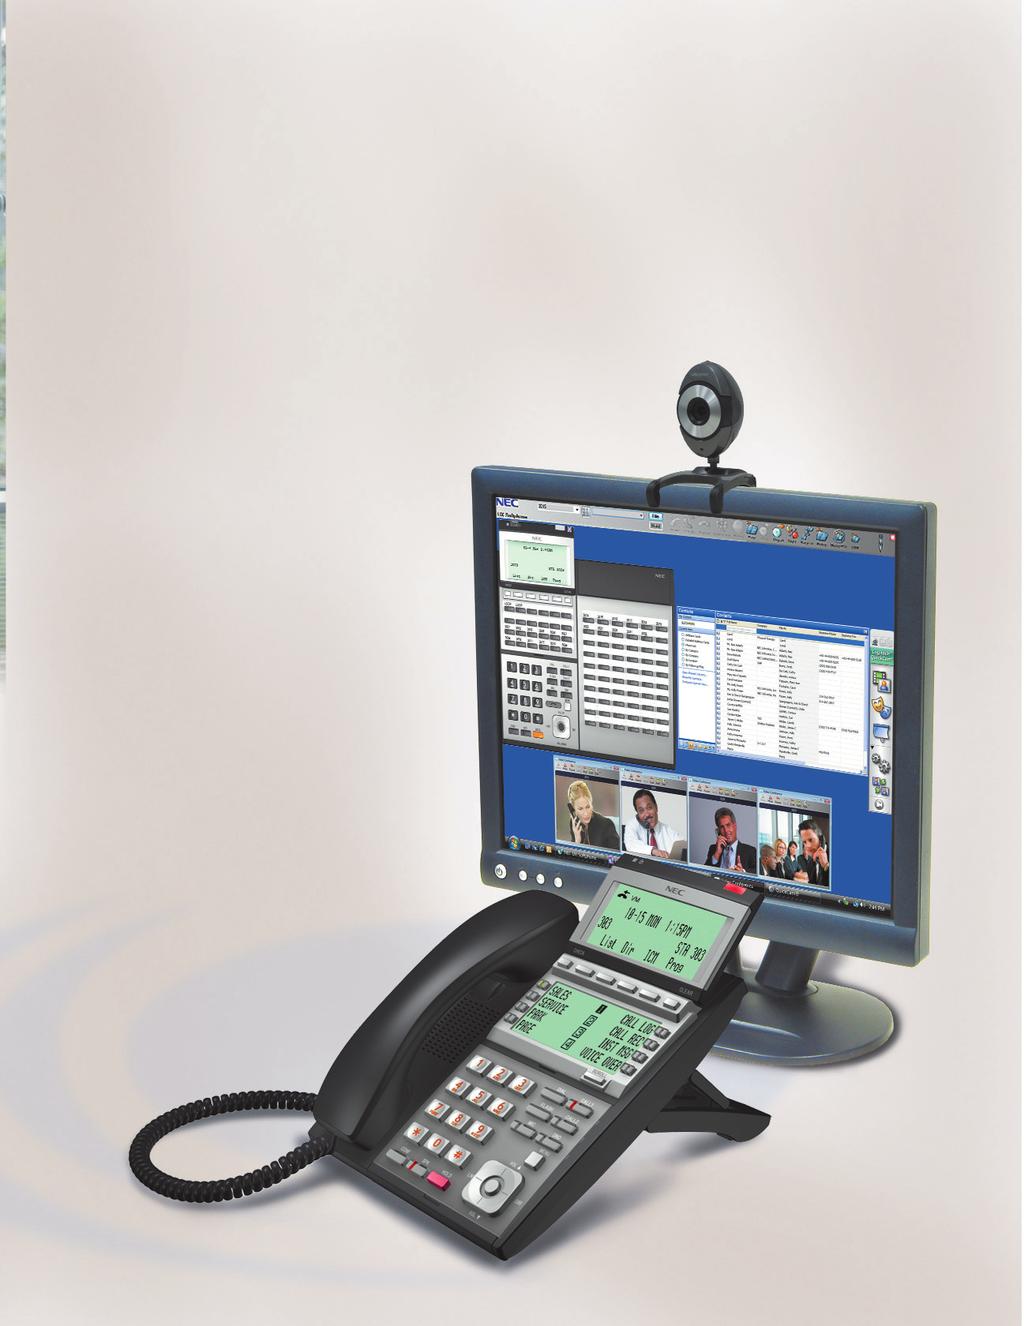 Offer The Latest VoIP Technology and Improved Functionality In today s technology driven market, your communication server and your personal computer are invaluable tools that are central to your